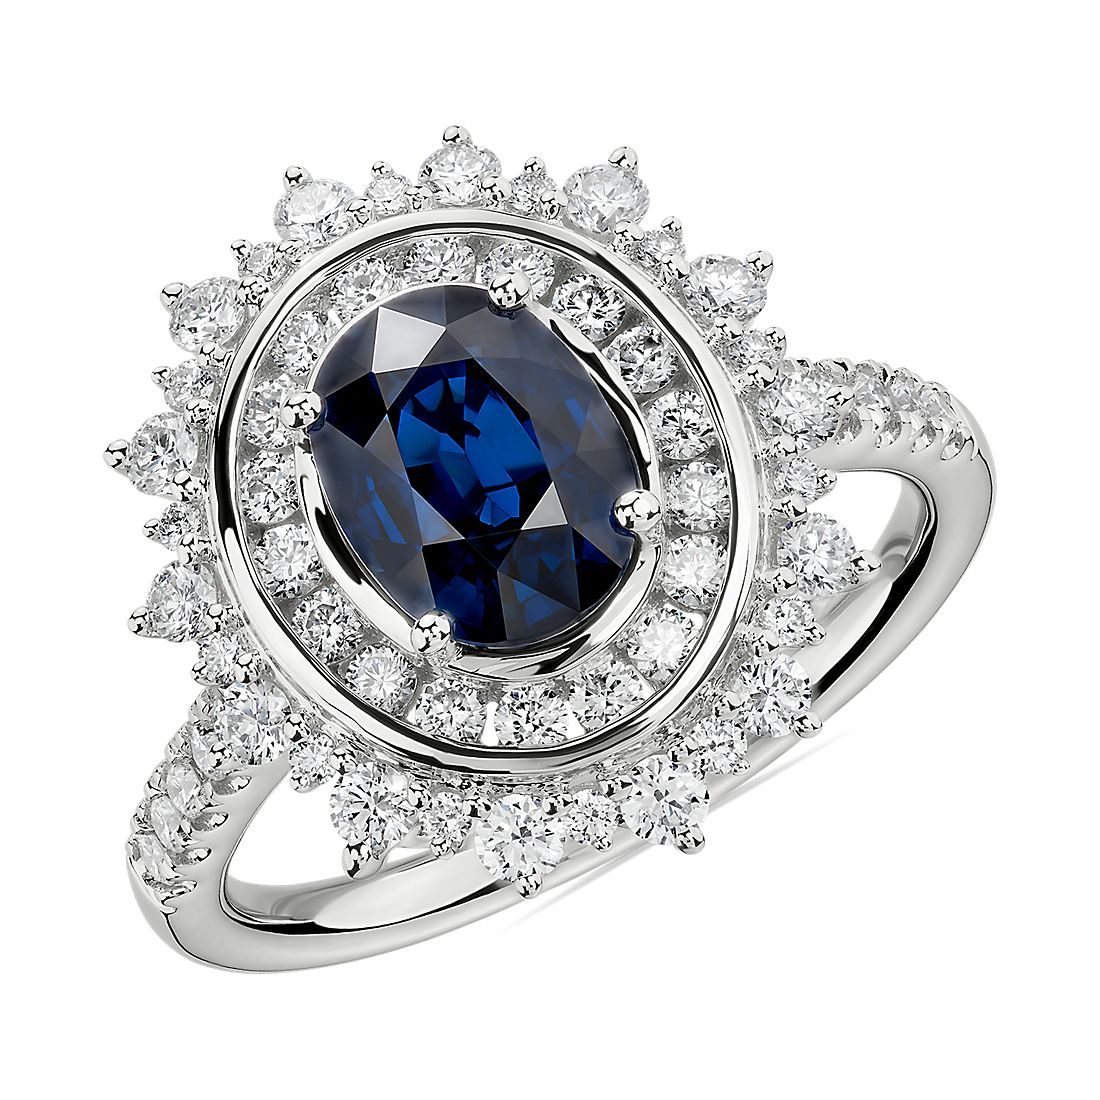 Oval Sapphire Ring with Double Diamond Sunburst Halo in 14k White Gold